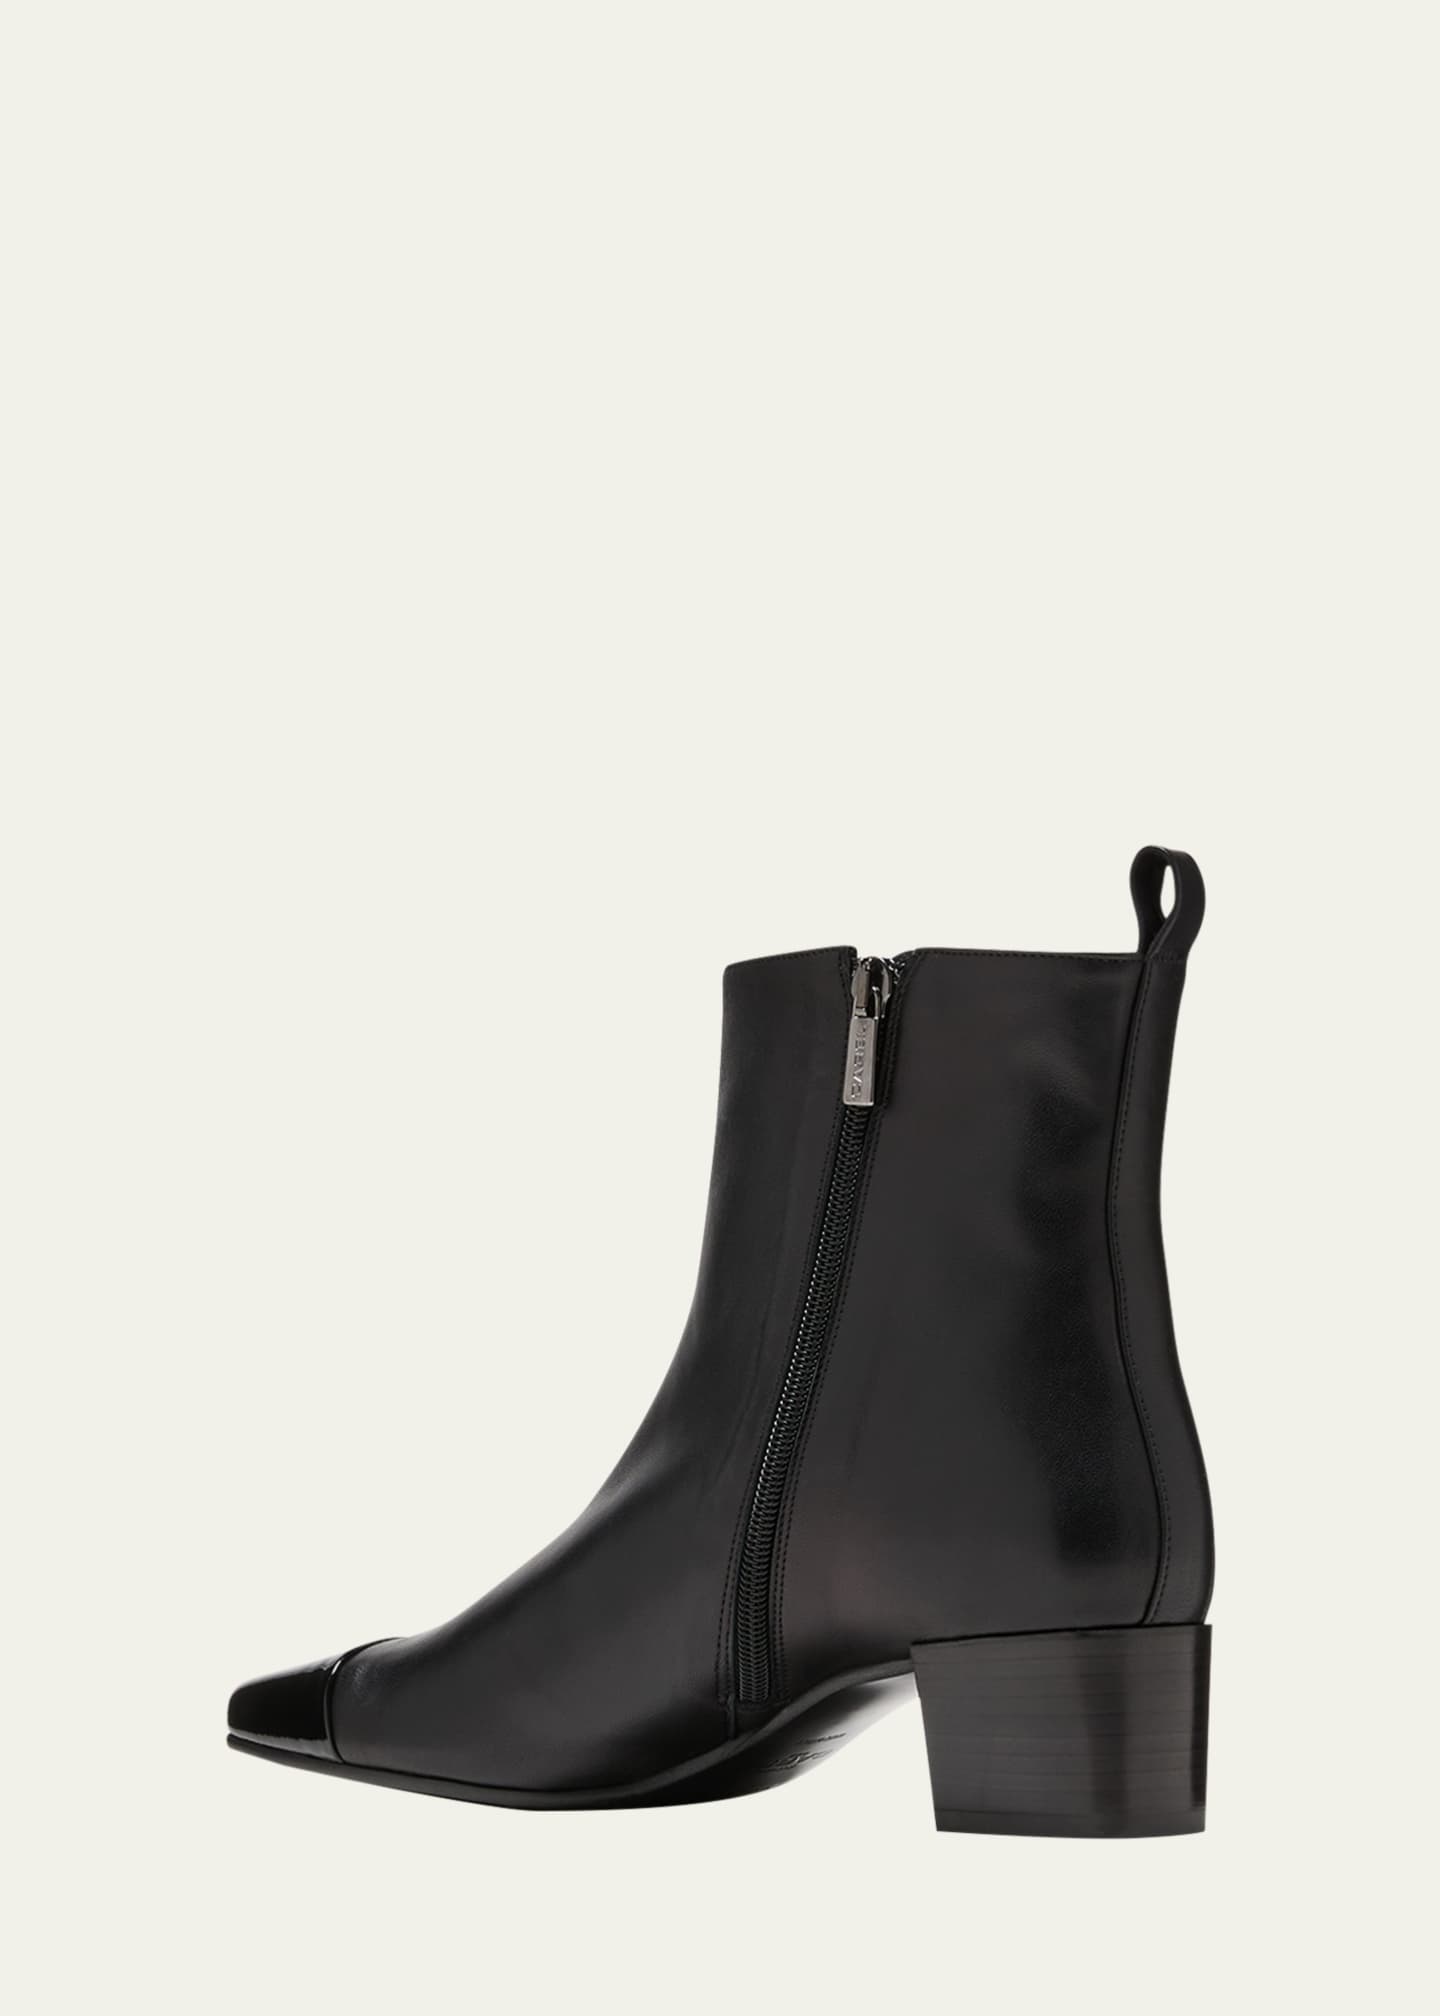 CAREL Estime Mixed Leather Ankle Boots - Bergdorf Goodman